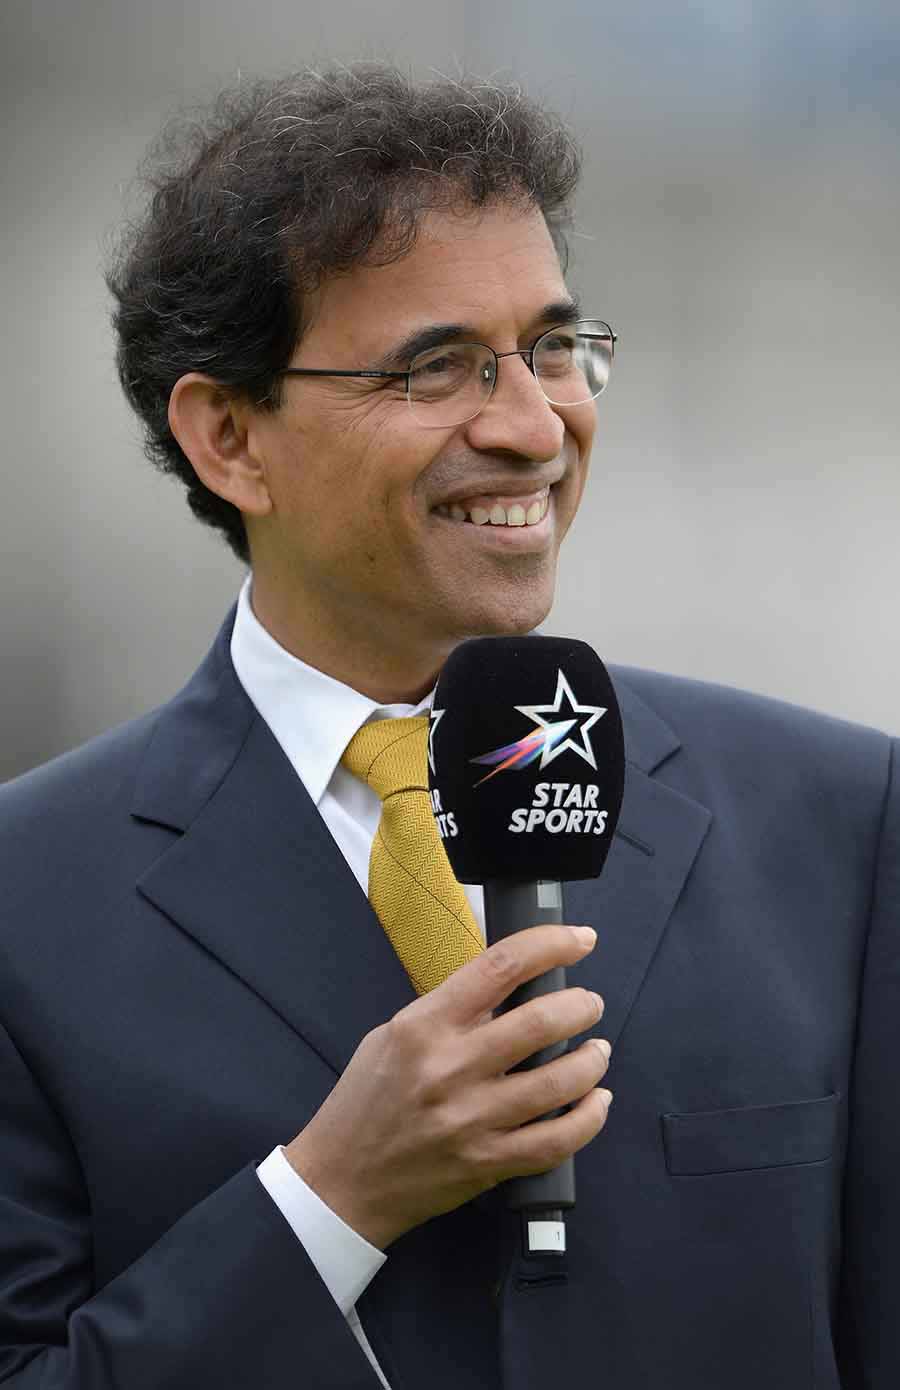 Harsha Bhogle: For more than three decades, Bhogle has been the ‘voice of cricket’, an endearing and enriching soundtrack to a sport that has increasingly less room for those of his kind, the ones who have never played the game at the highest level. While Bhogle’s on-air humour and his knack to find the most succinct phrases to explain the action remain at their finest, he is perhaps the only broadcaster that can make an IPL post-match interview a highlight. Especially when Mahendra Singh Dhoni is at the other end of the mic. In our report card, Bhogle scores a near-perfect 9.5 out of 10. When it comes to calling cricket, it simply does not get better than Bhogle in the present day